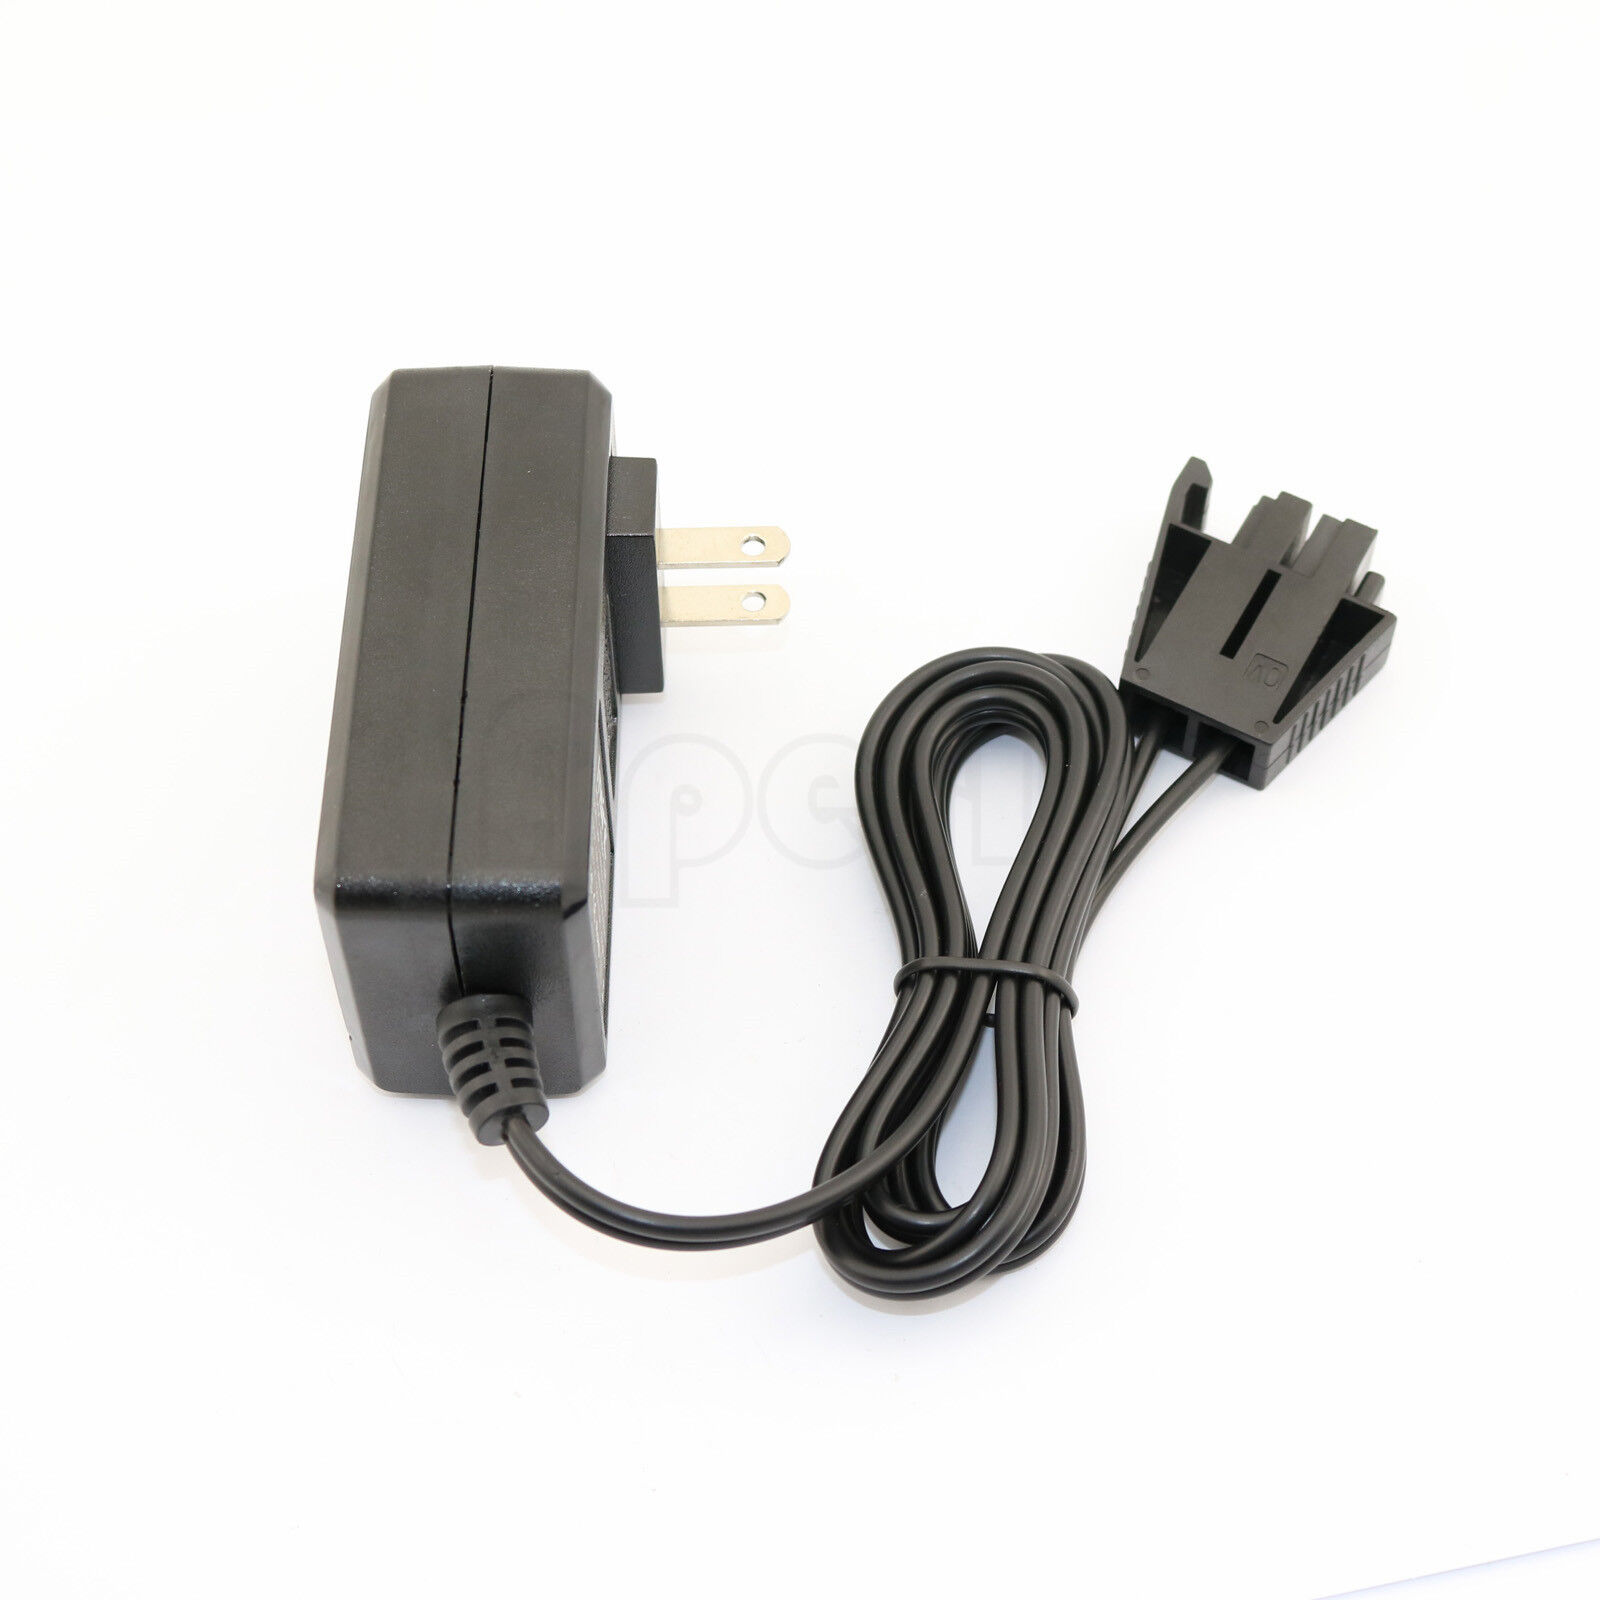 NEW Battery Charger Adaptor For Vax VX58 Stick Vac Vacuum Cleaner AU STOCK MPN does not apply Battery Included No Br